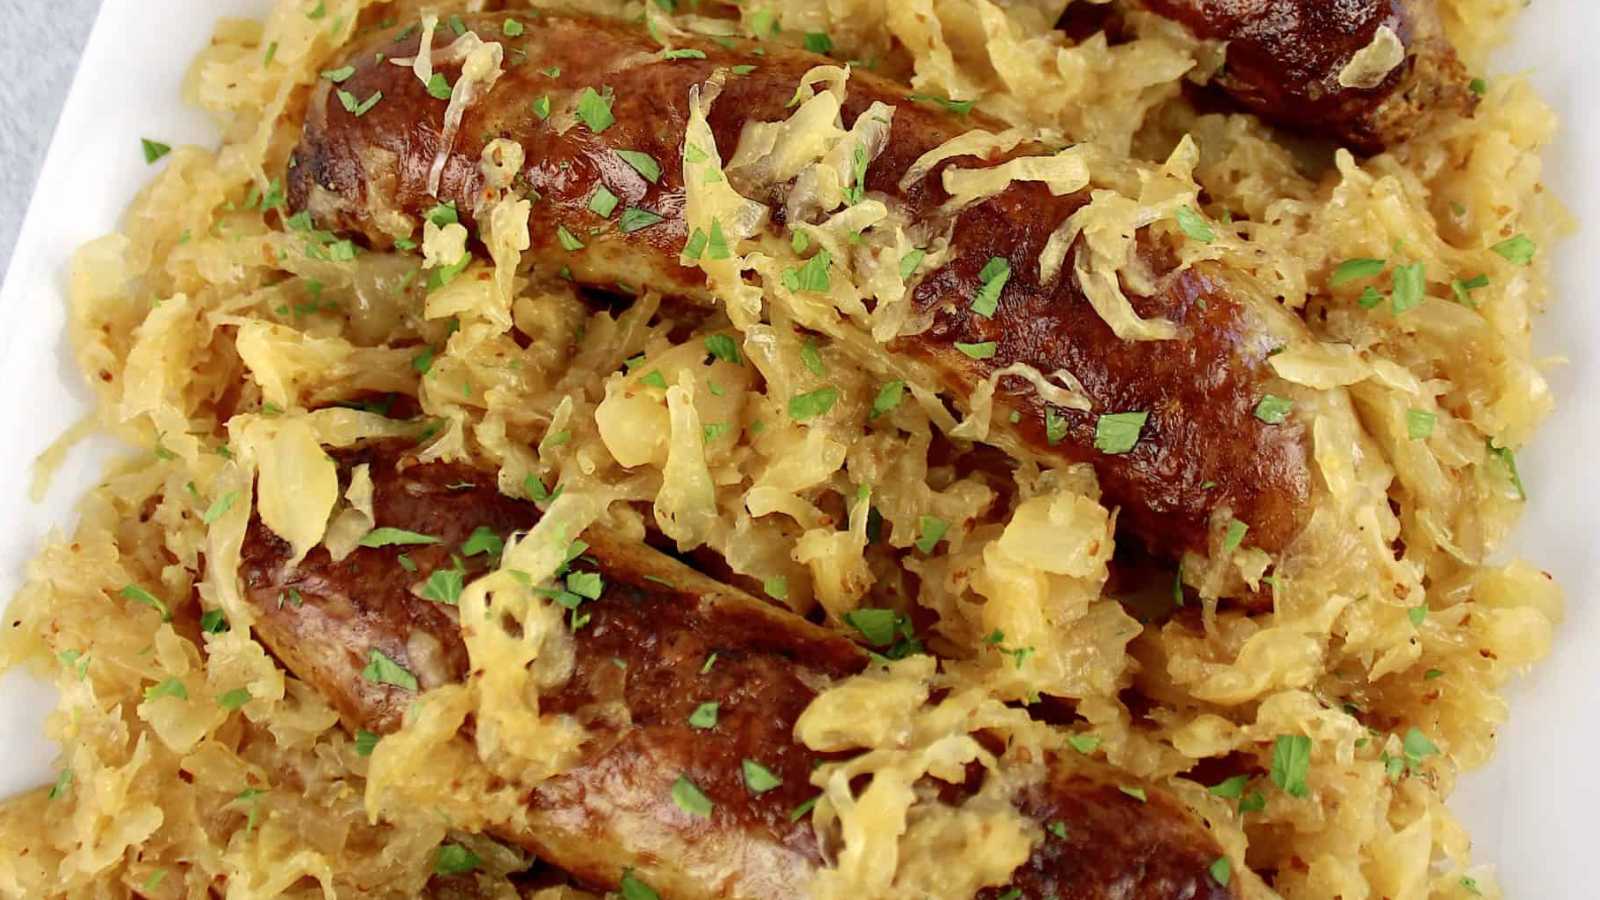 A plate of combined smoky flavors of kielbasa with tangy sauerkraut.